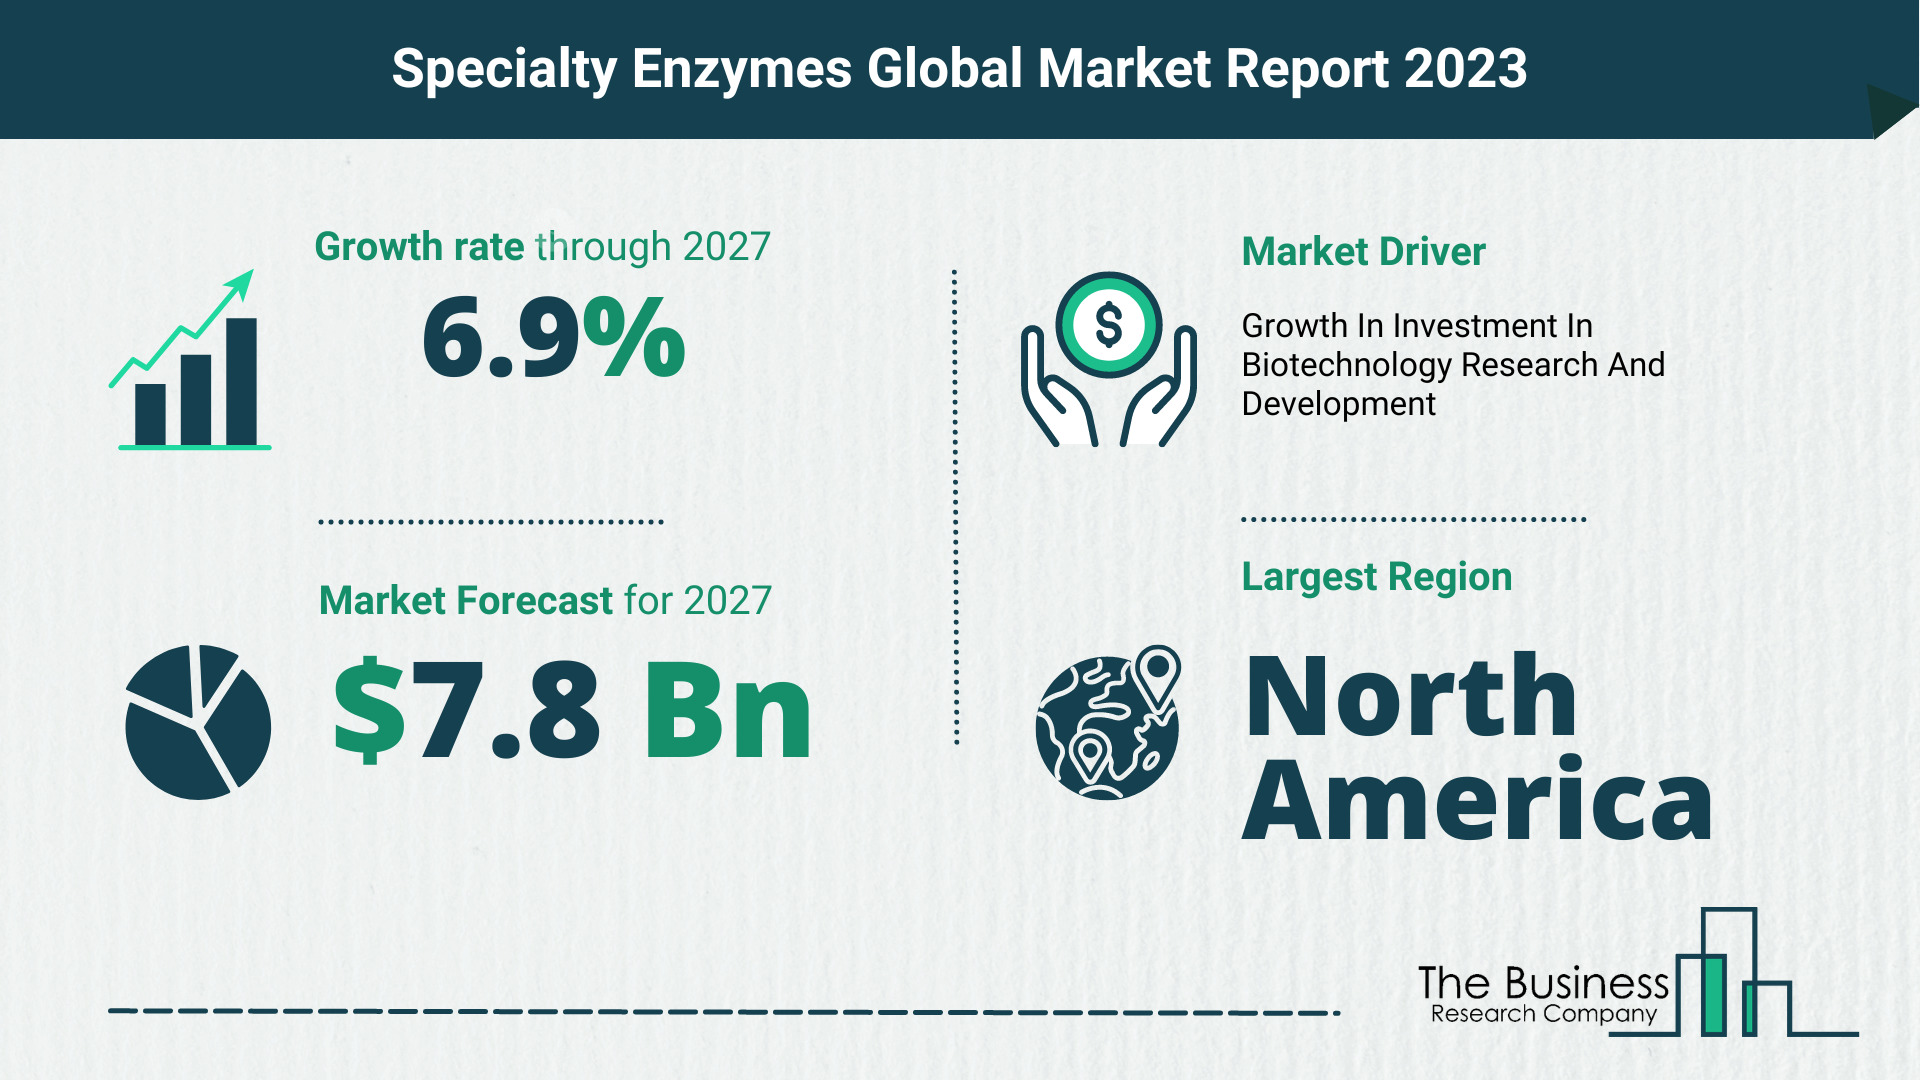 Global Specialty Enzymes Market Size